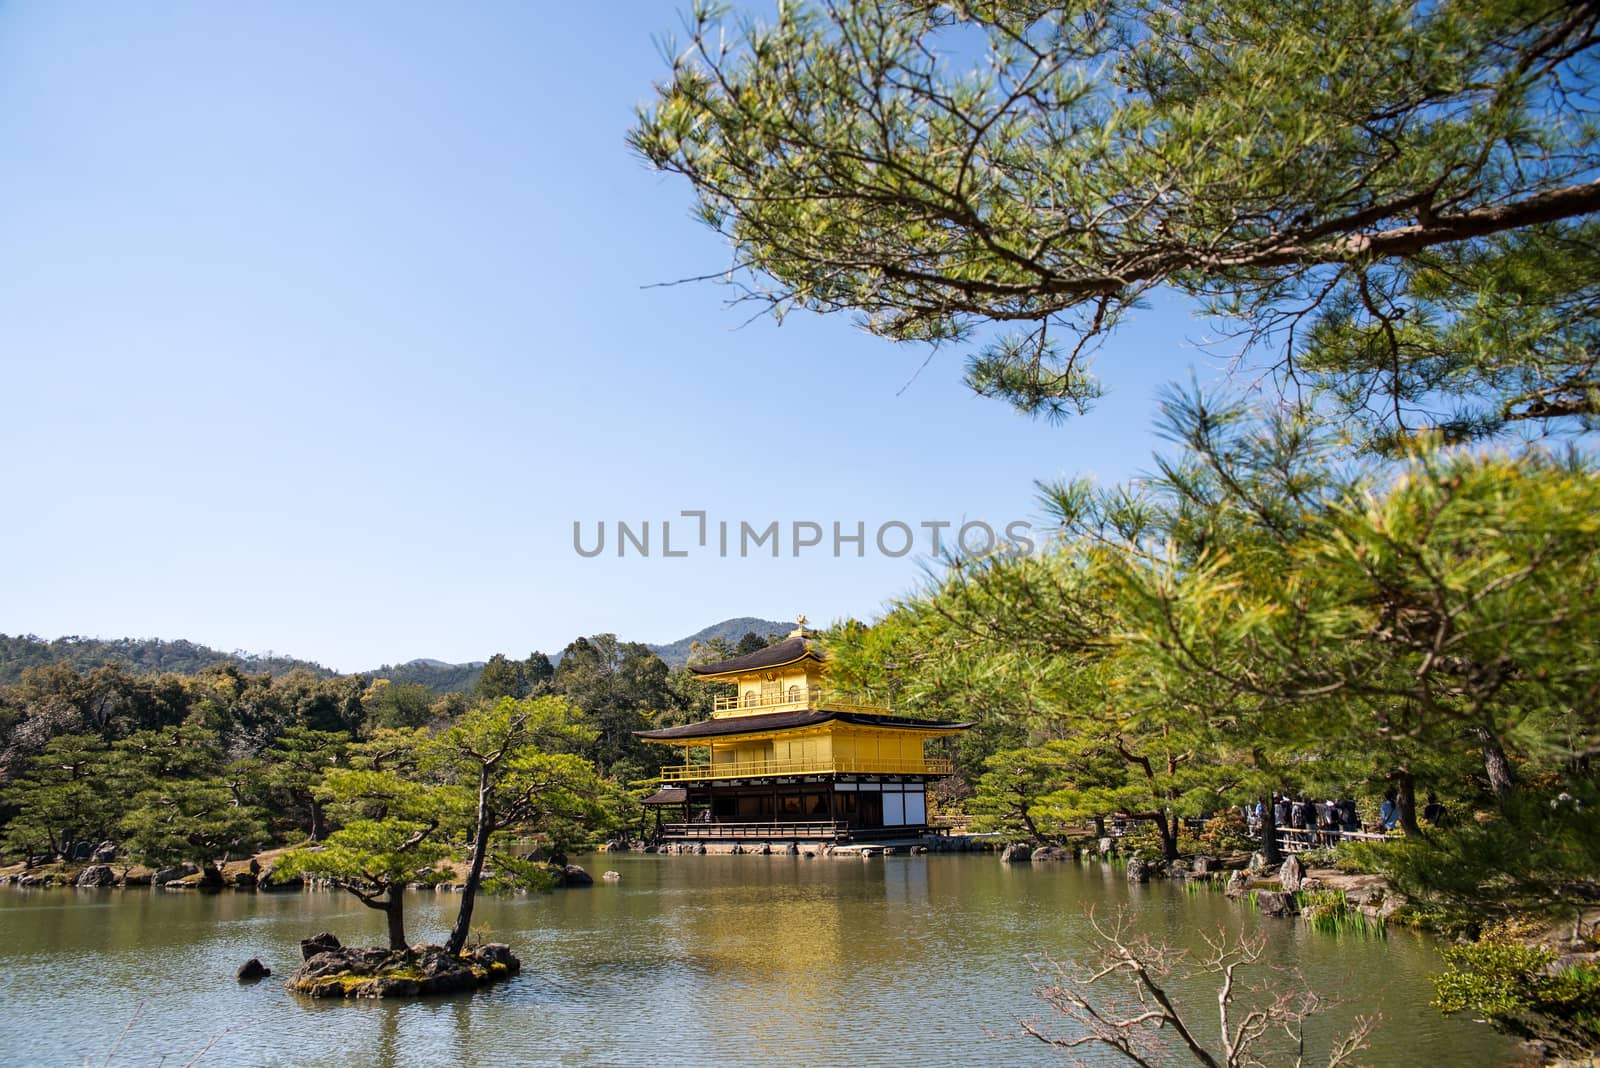 Kinkakuji (Golden Pavilion) is a Zen temple in northern Kyoto whose top two floors are completely covered in gold leaf.